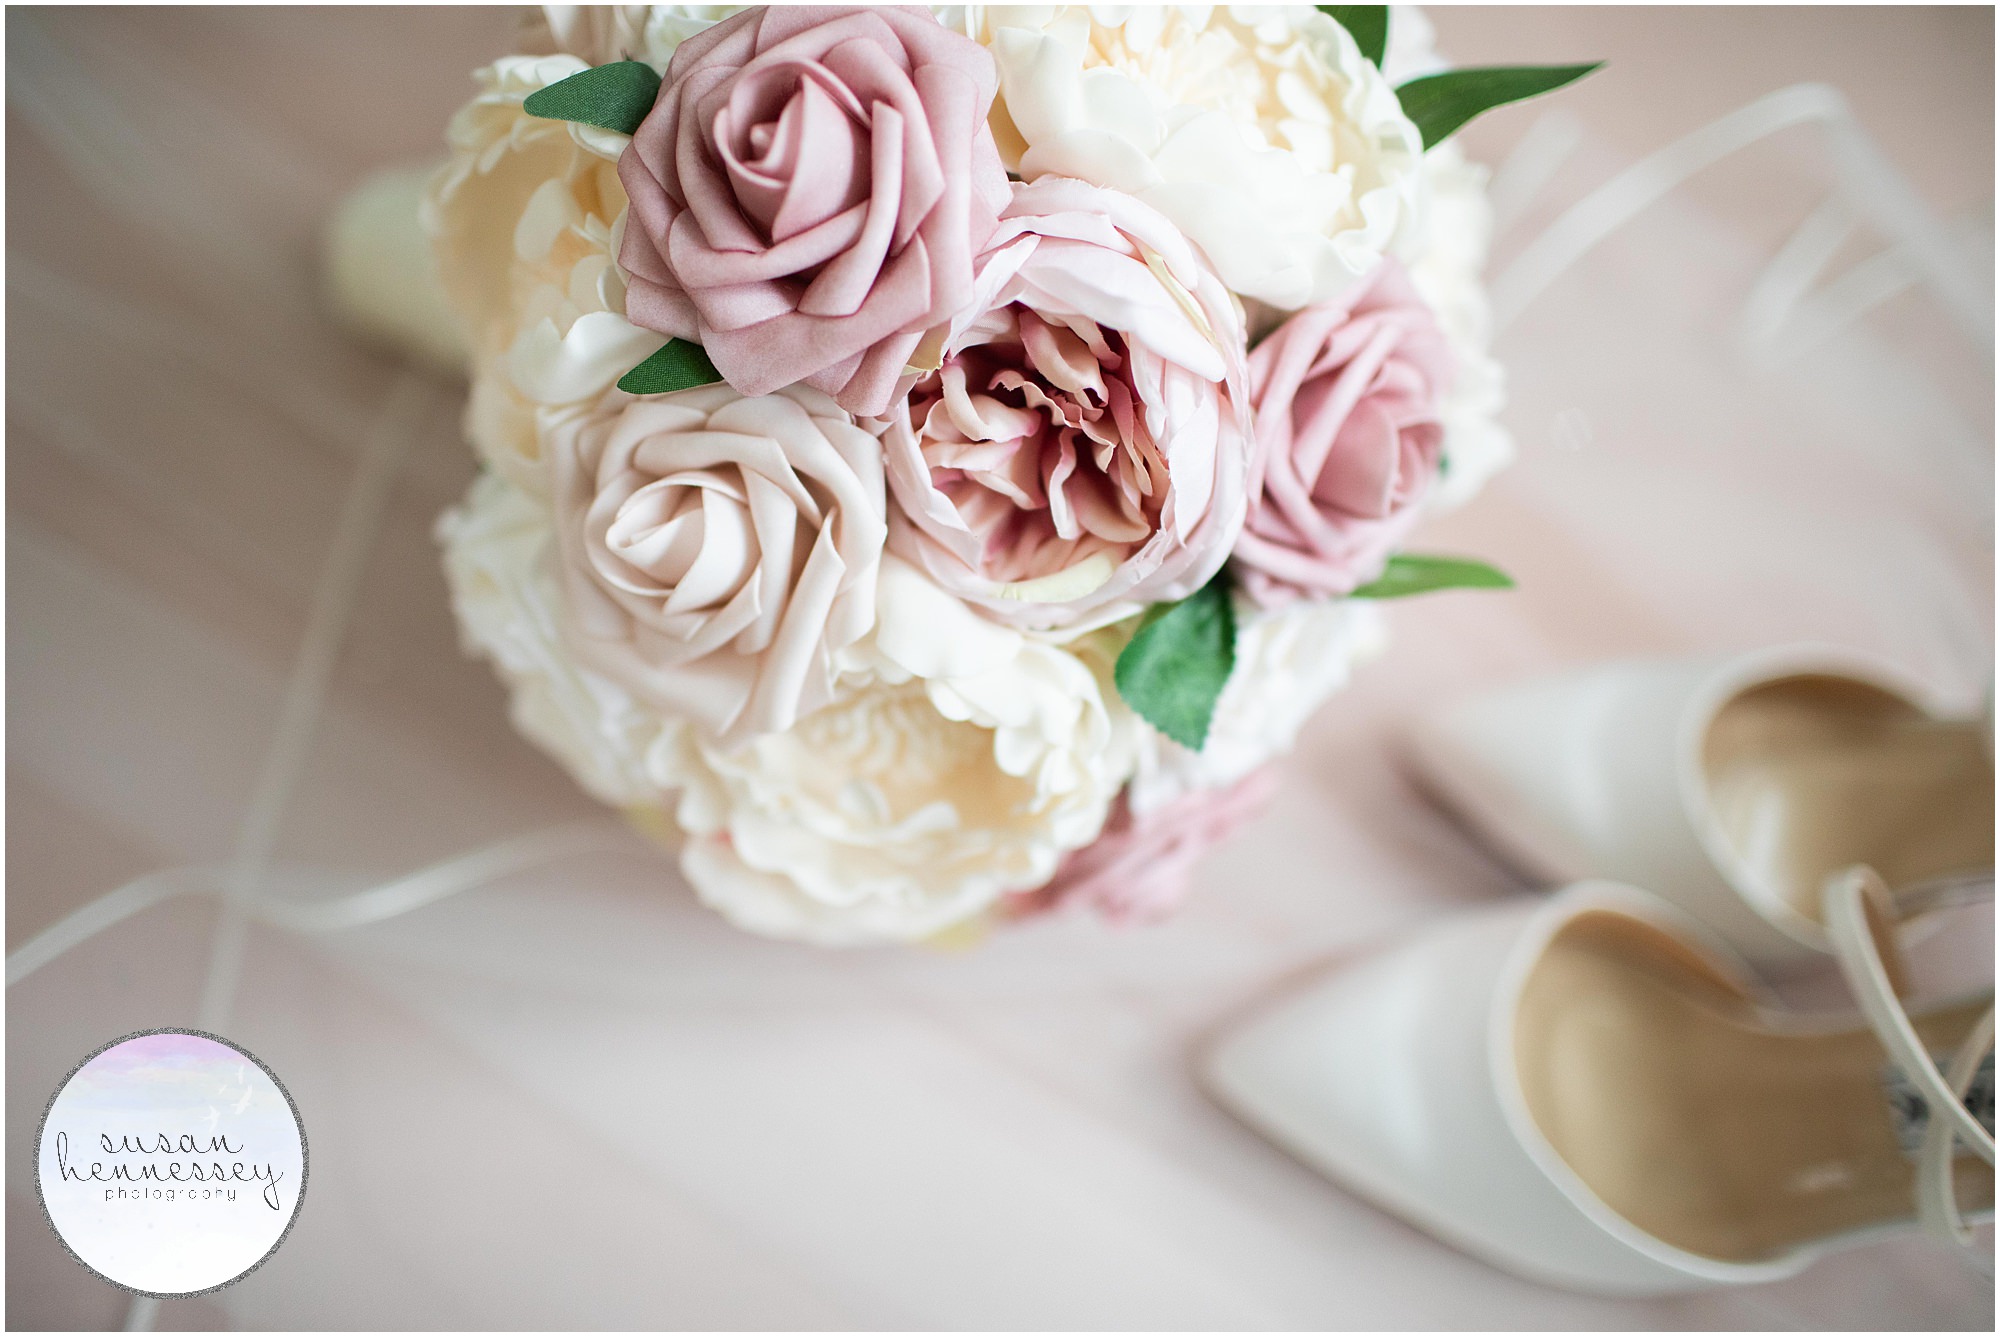 Planning a Micro Wedding? This post is filled with Spring wedding inspiration.